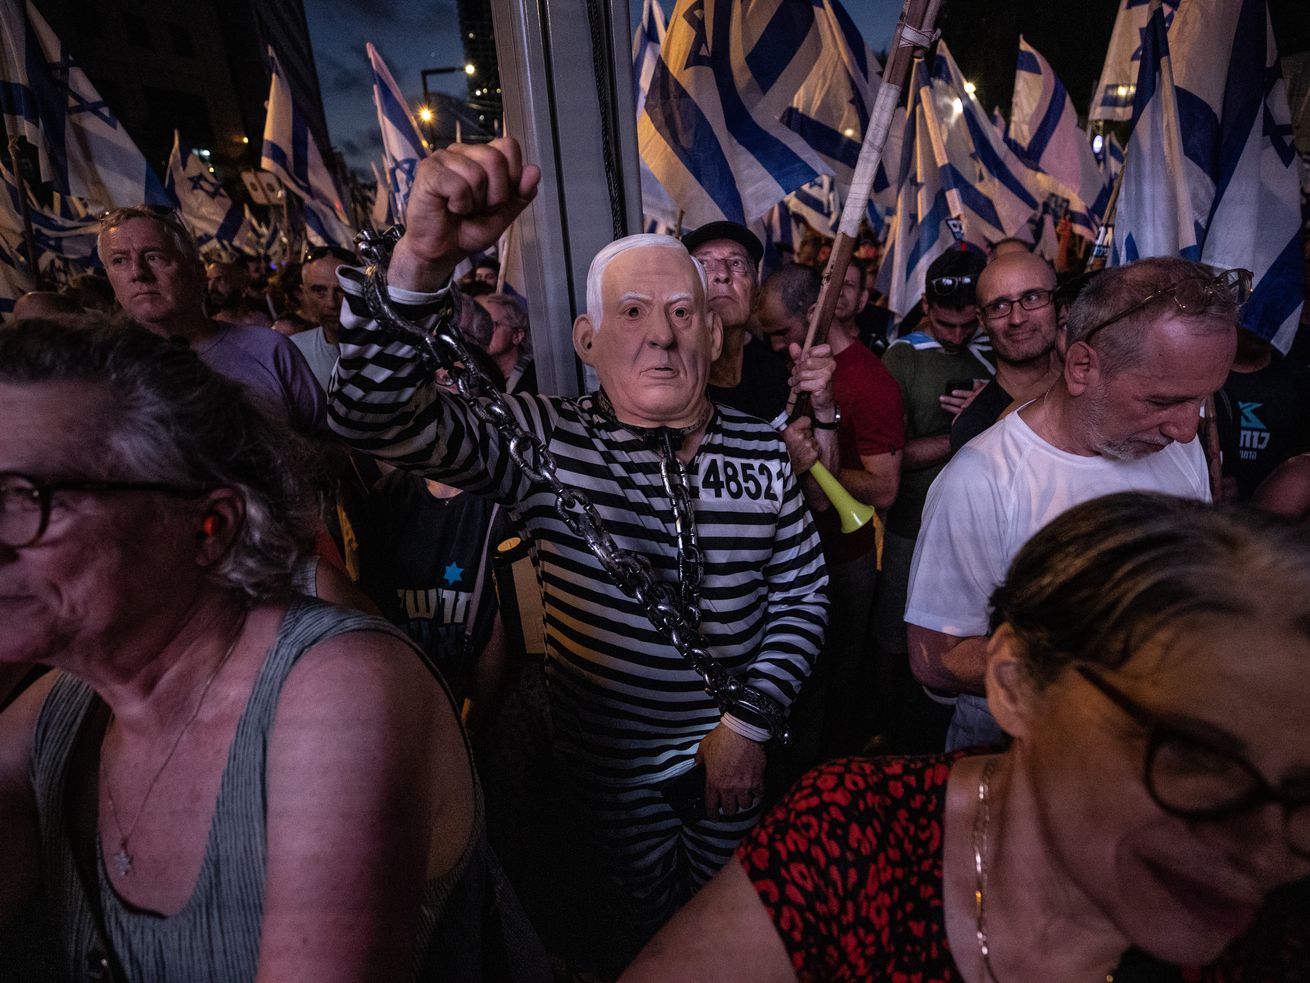 A crowd of protesters, waving blue and white Israeli flags, march through Jerusalem, Israel, on July 23, 2023. One protester wears a black and white striped inmate costume and a rubber mask resembling Netanyahu’s face, and raises a fist in the air.